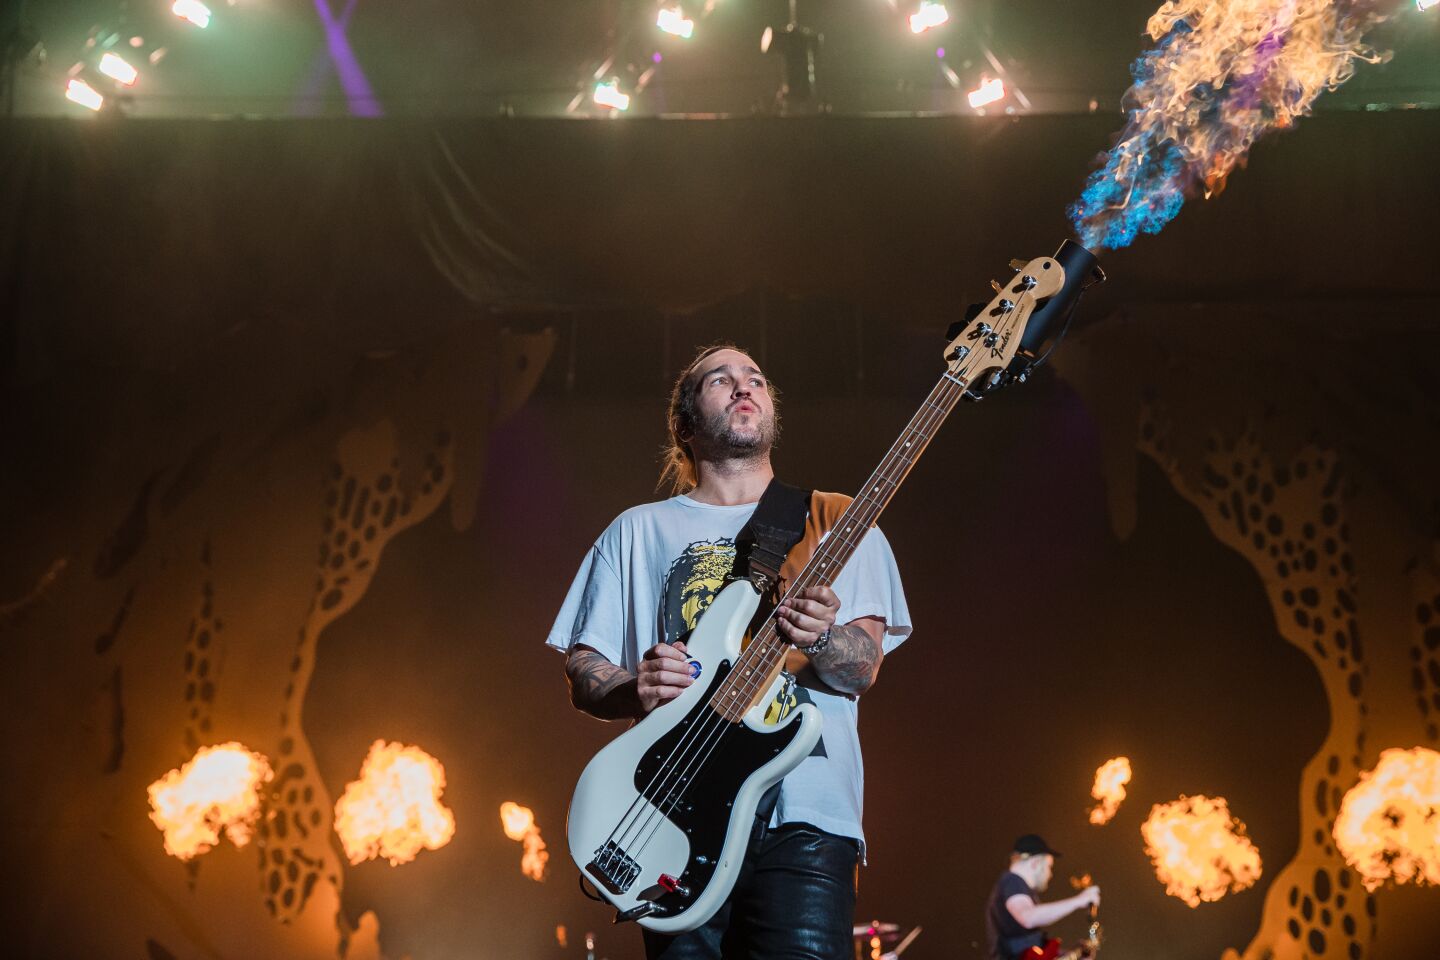 Bassist Singer Pete Wentz of Fall Out Boy during the Hella Mega Tour in downtown San Diego on August 29, 2021.